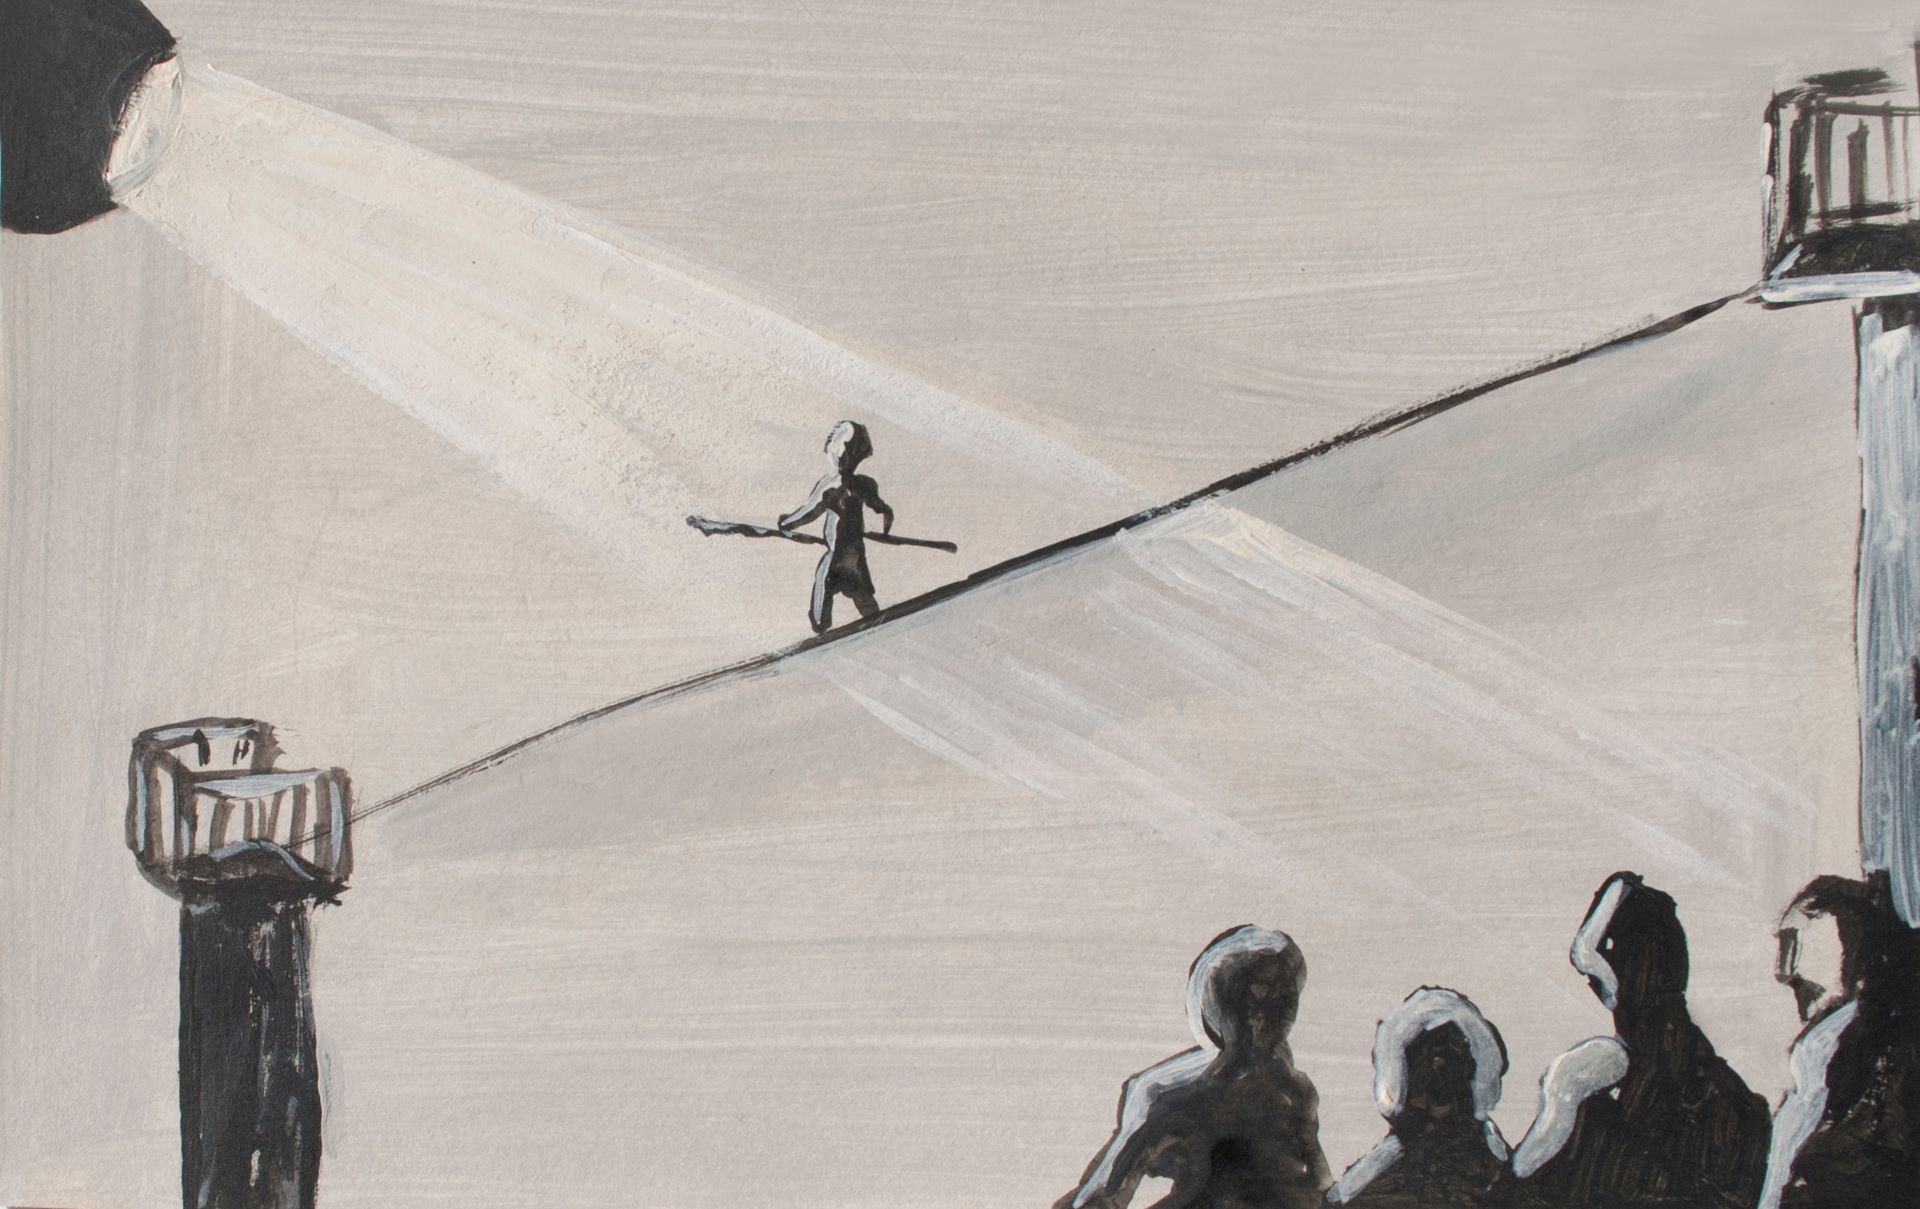 tightrope walker in sight of onlookers (black-and-white sketch)